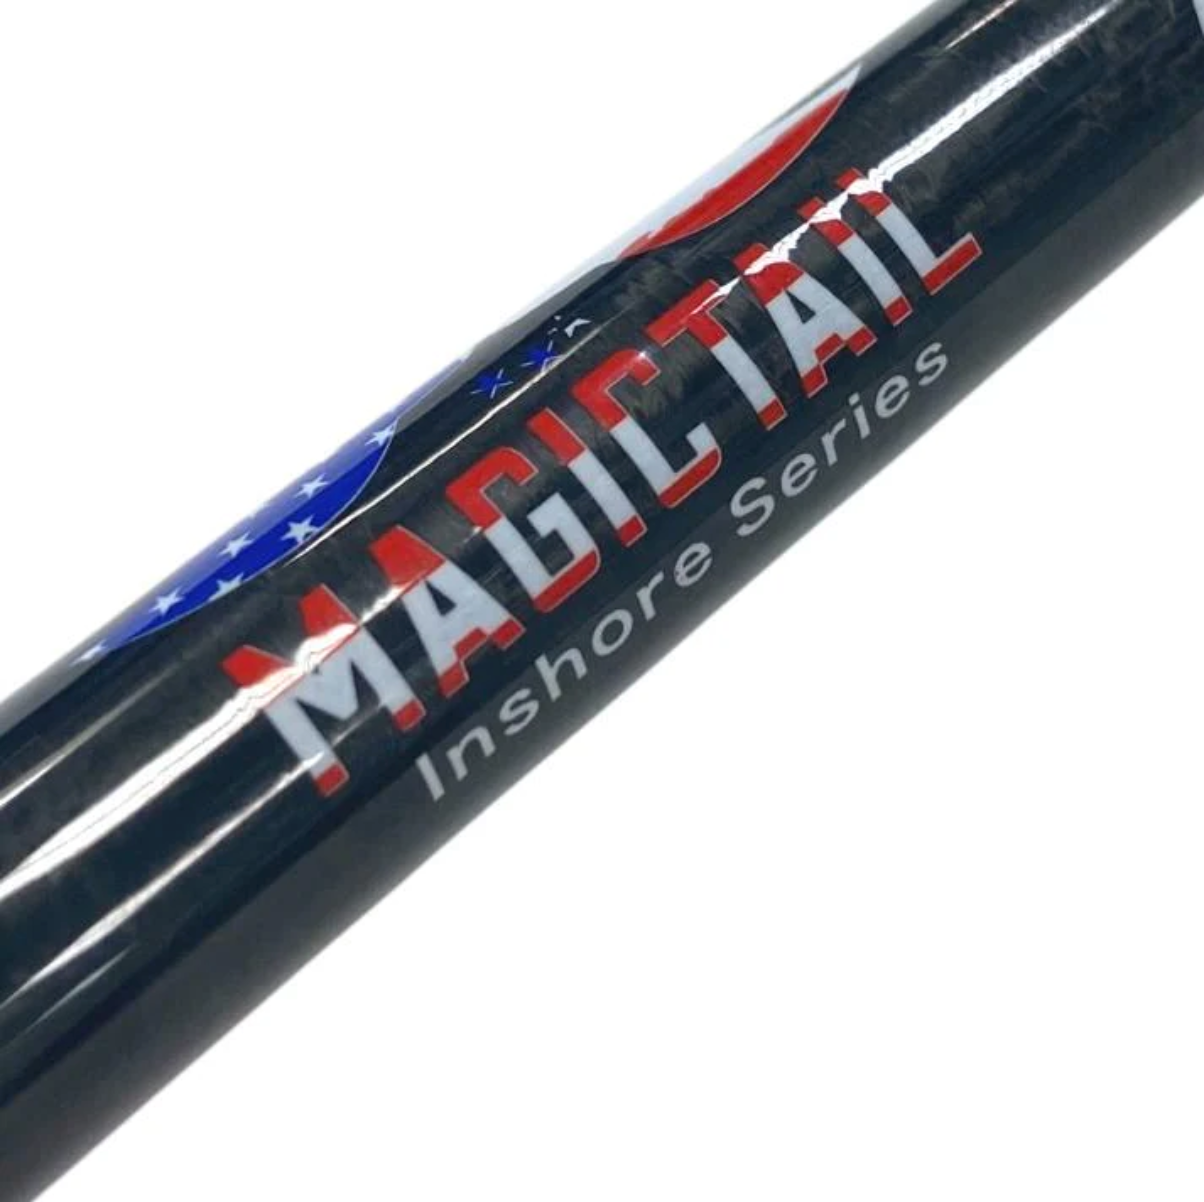 MagicTail Inshore Series Spinning Rods